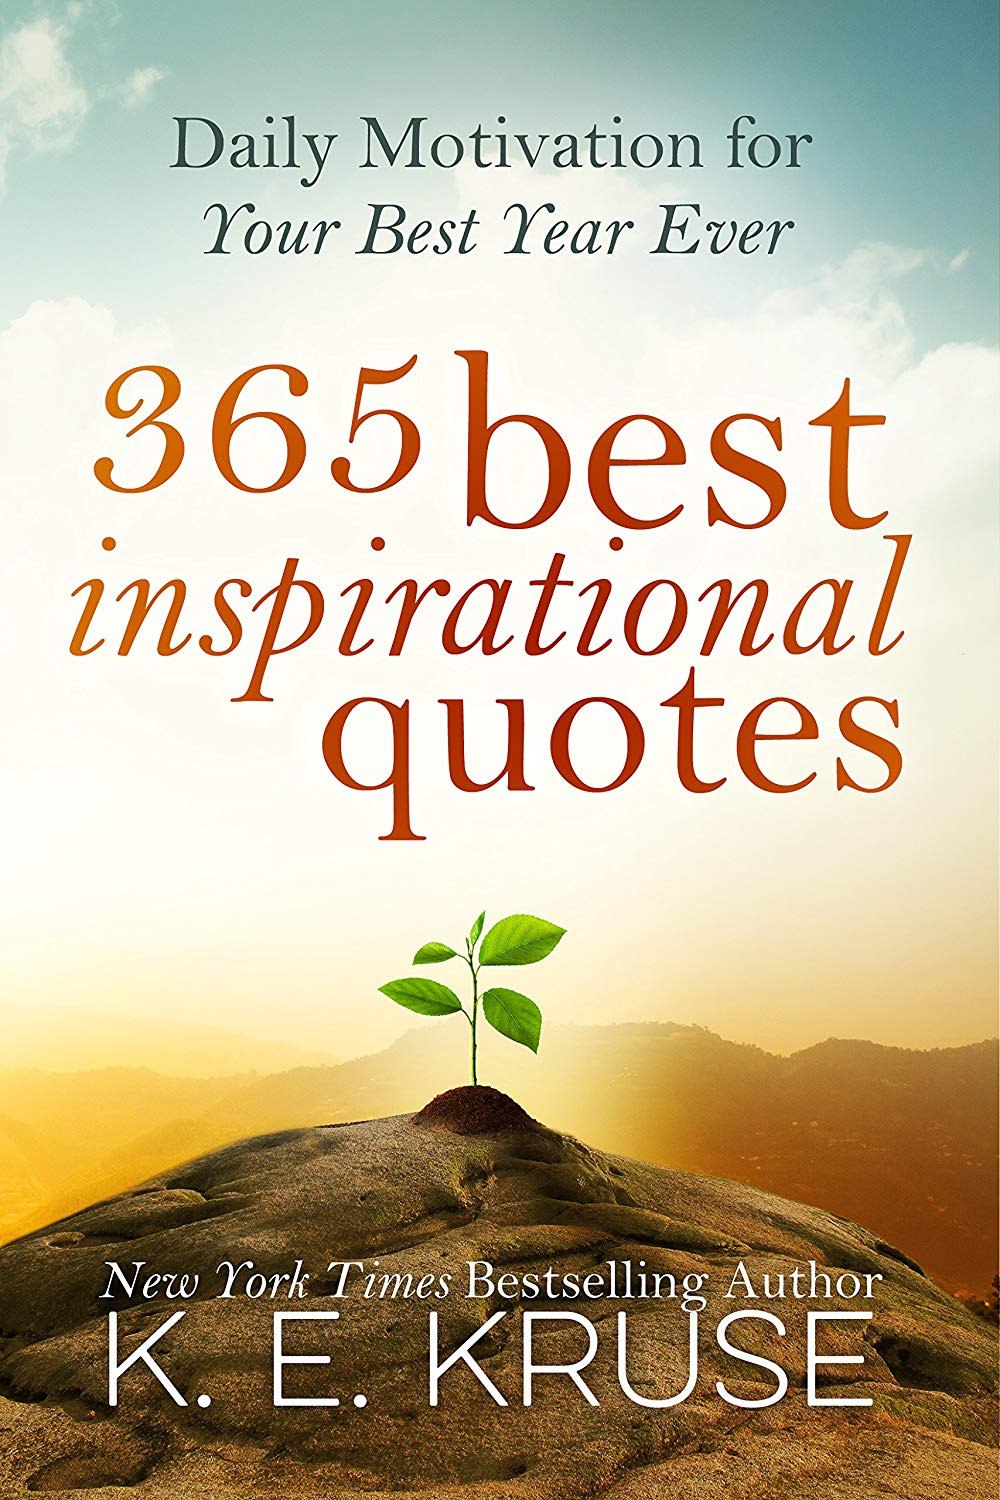 Best Inspirational Quotes
 AMAZON KINDLE BOOK PROMOTION 365 Best Inspirational